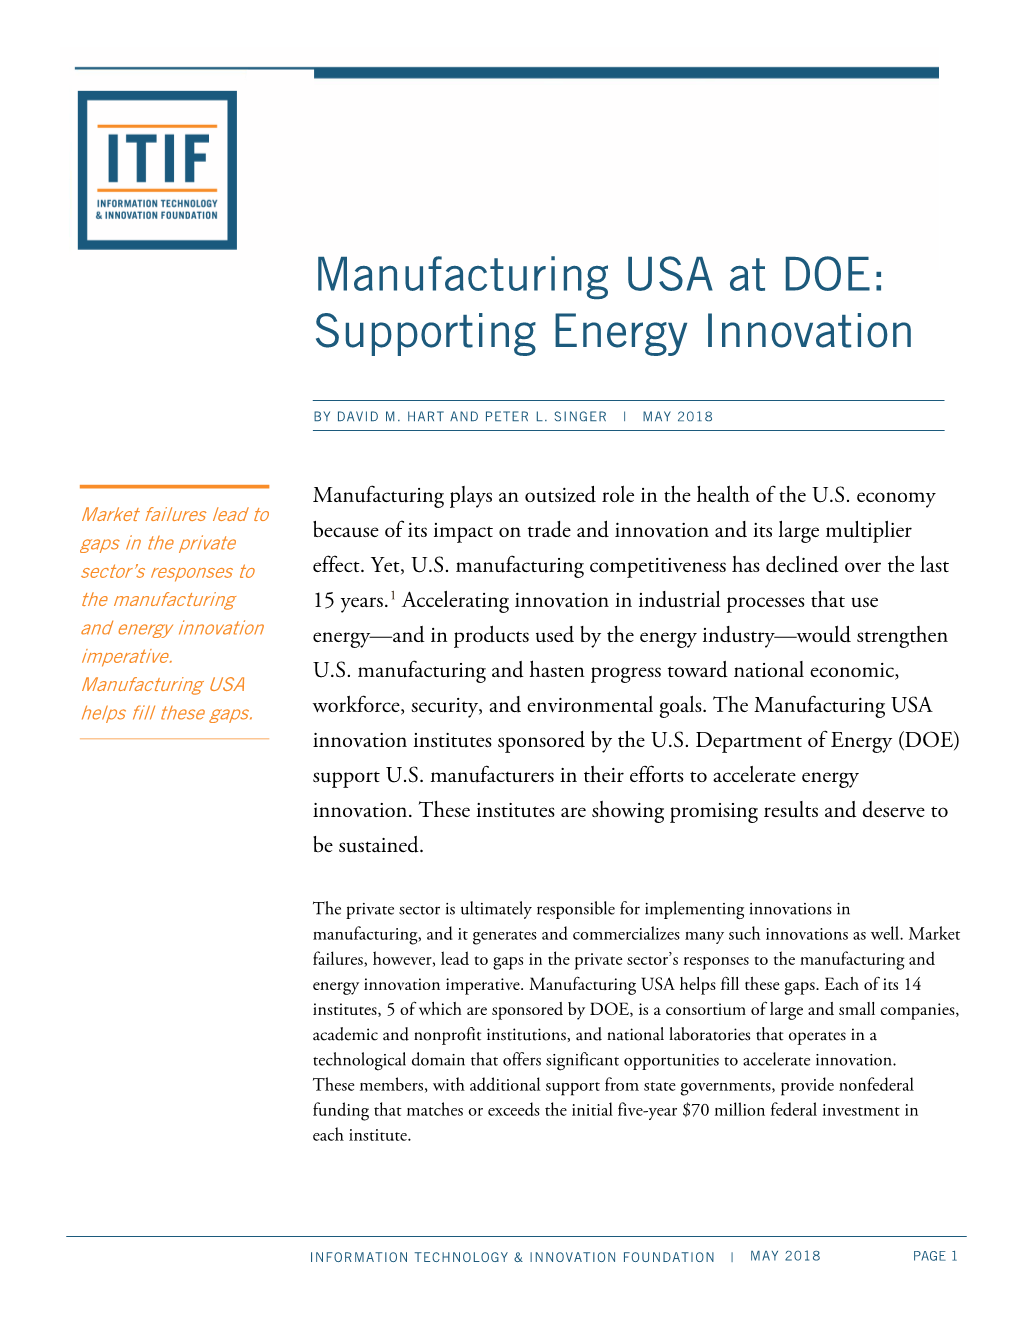 Manufacturing USA at DOE: Supporting Energy Innovation